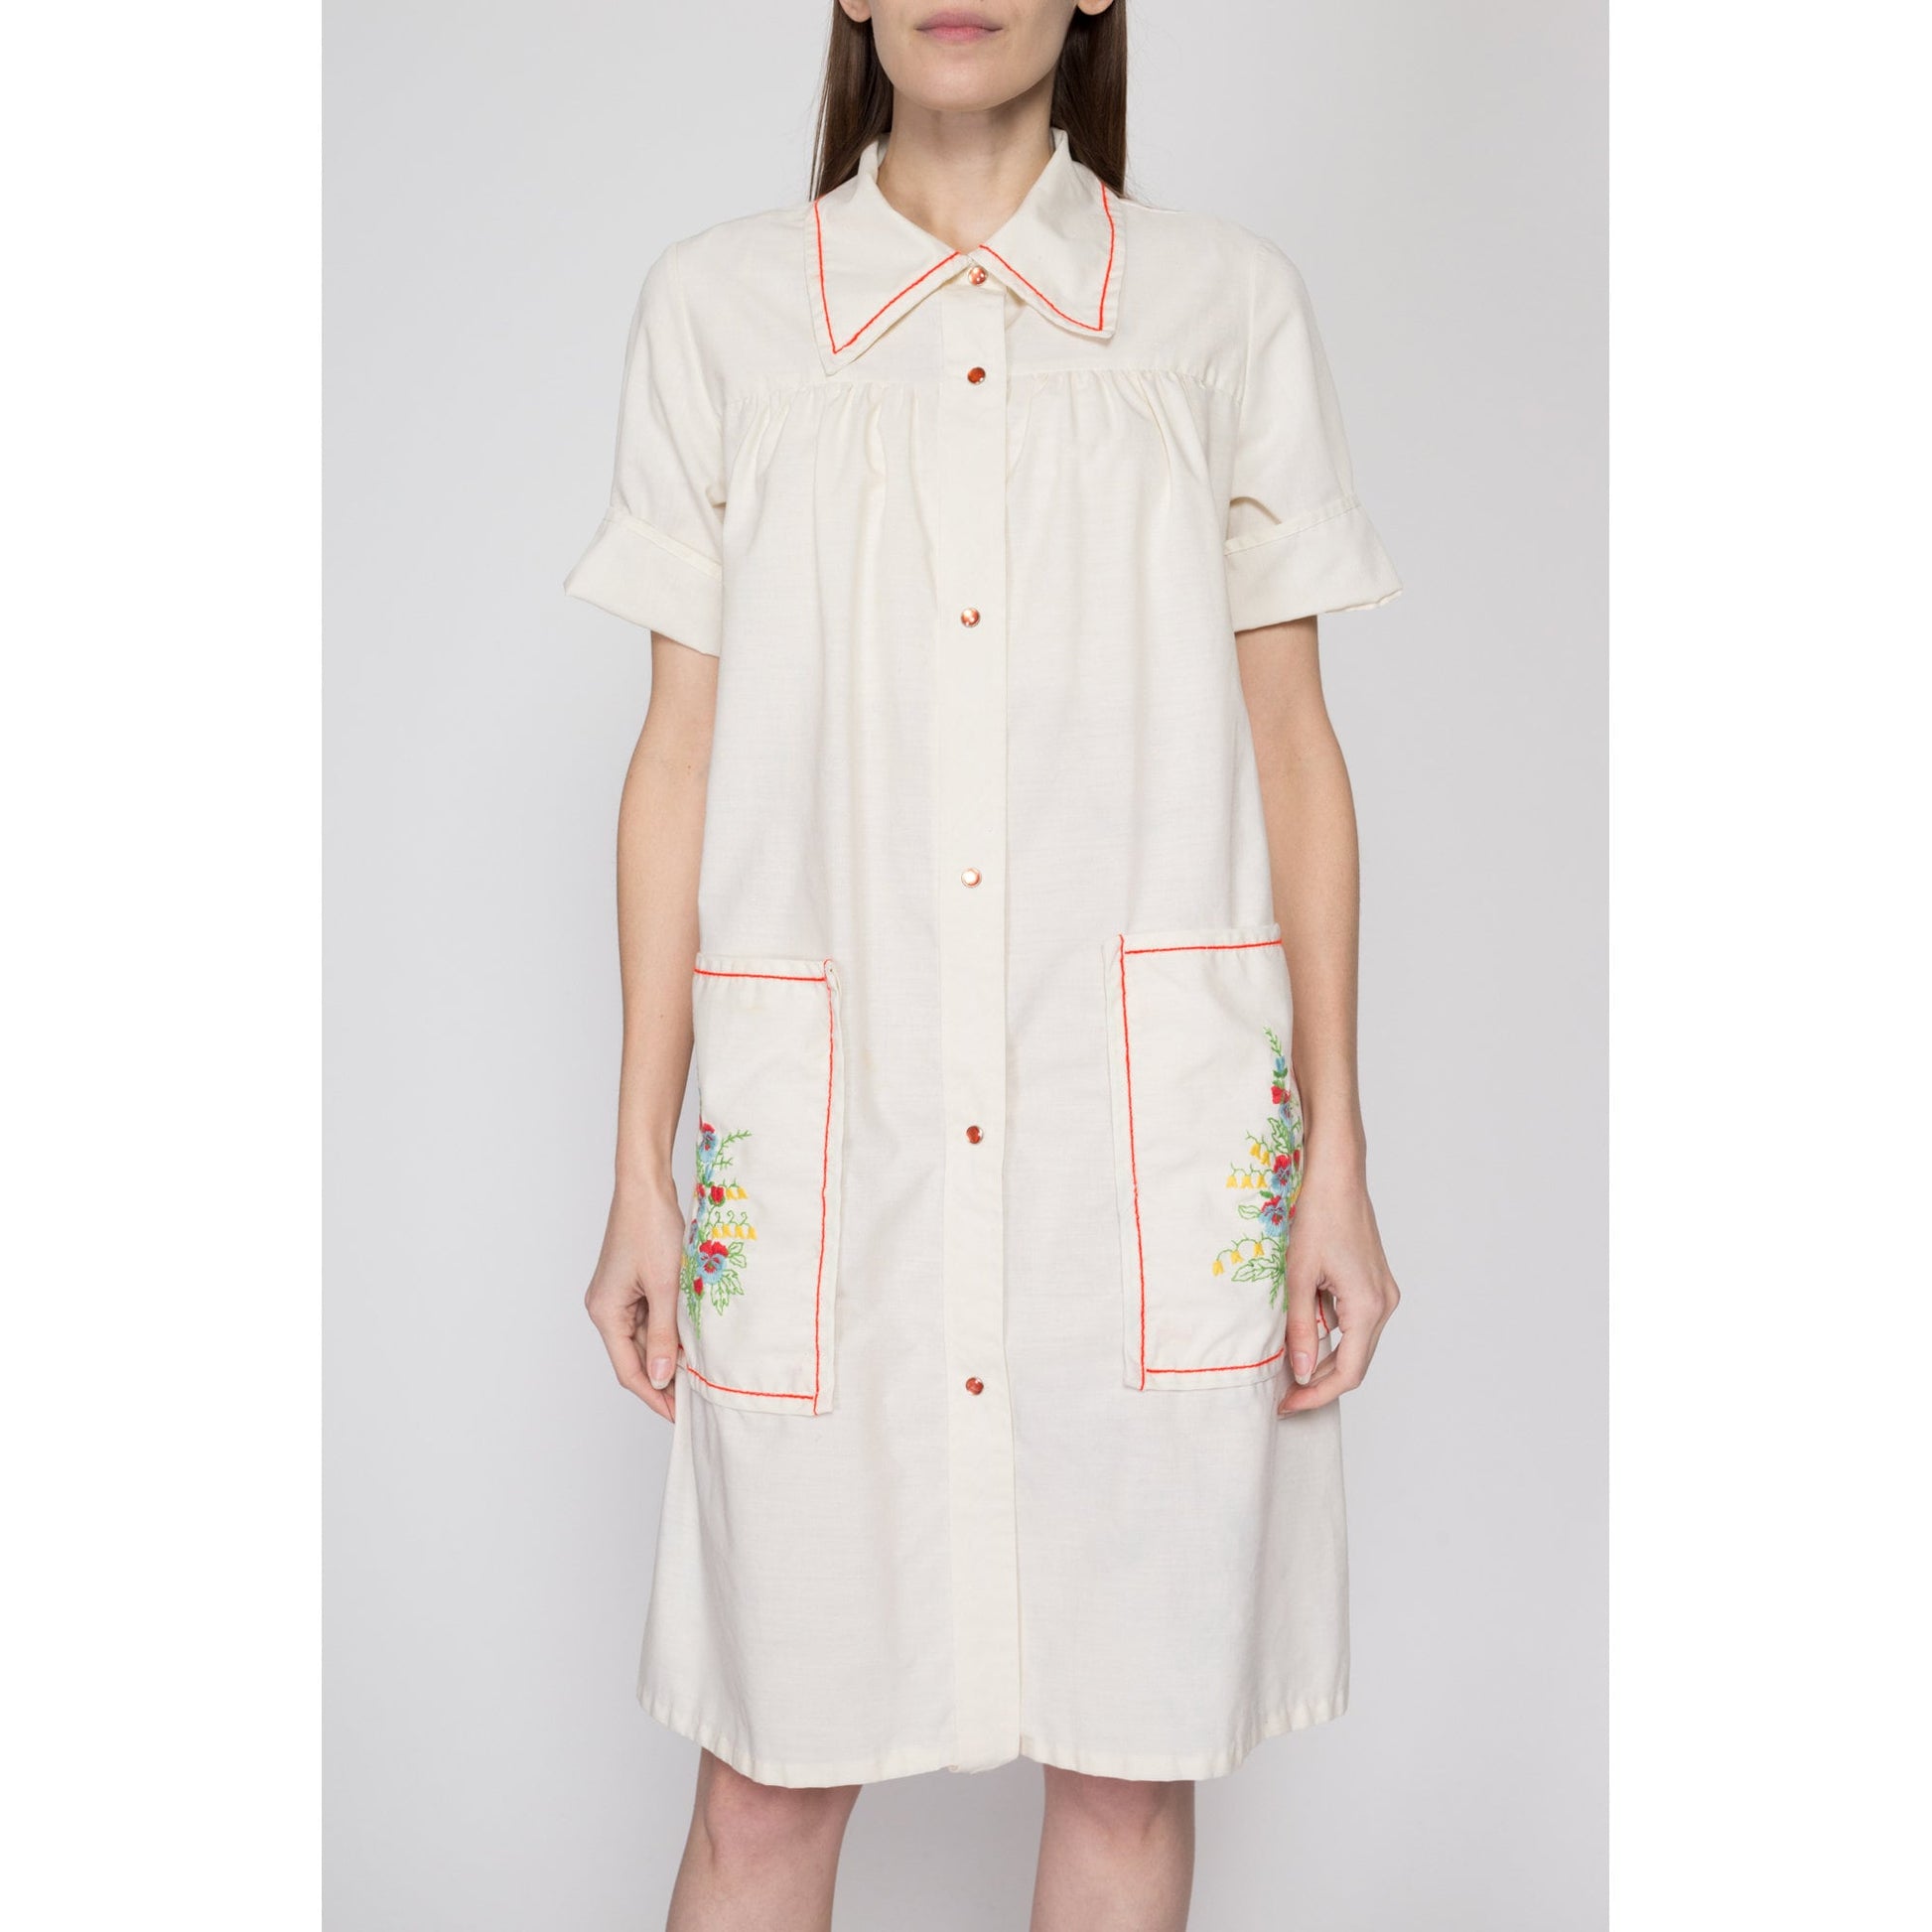 Large 60s White Pansy Floral Embroidered House Dress | Vintage Pearl Snap Short Sleeve Pointed Collar Shift Housecoat